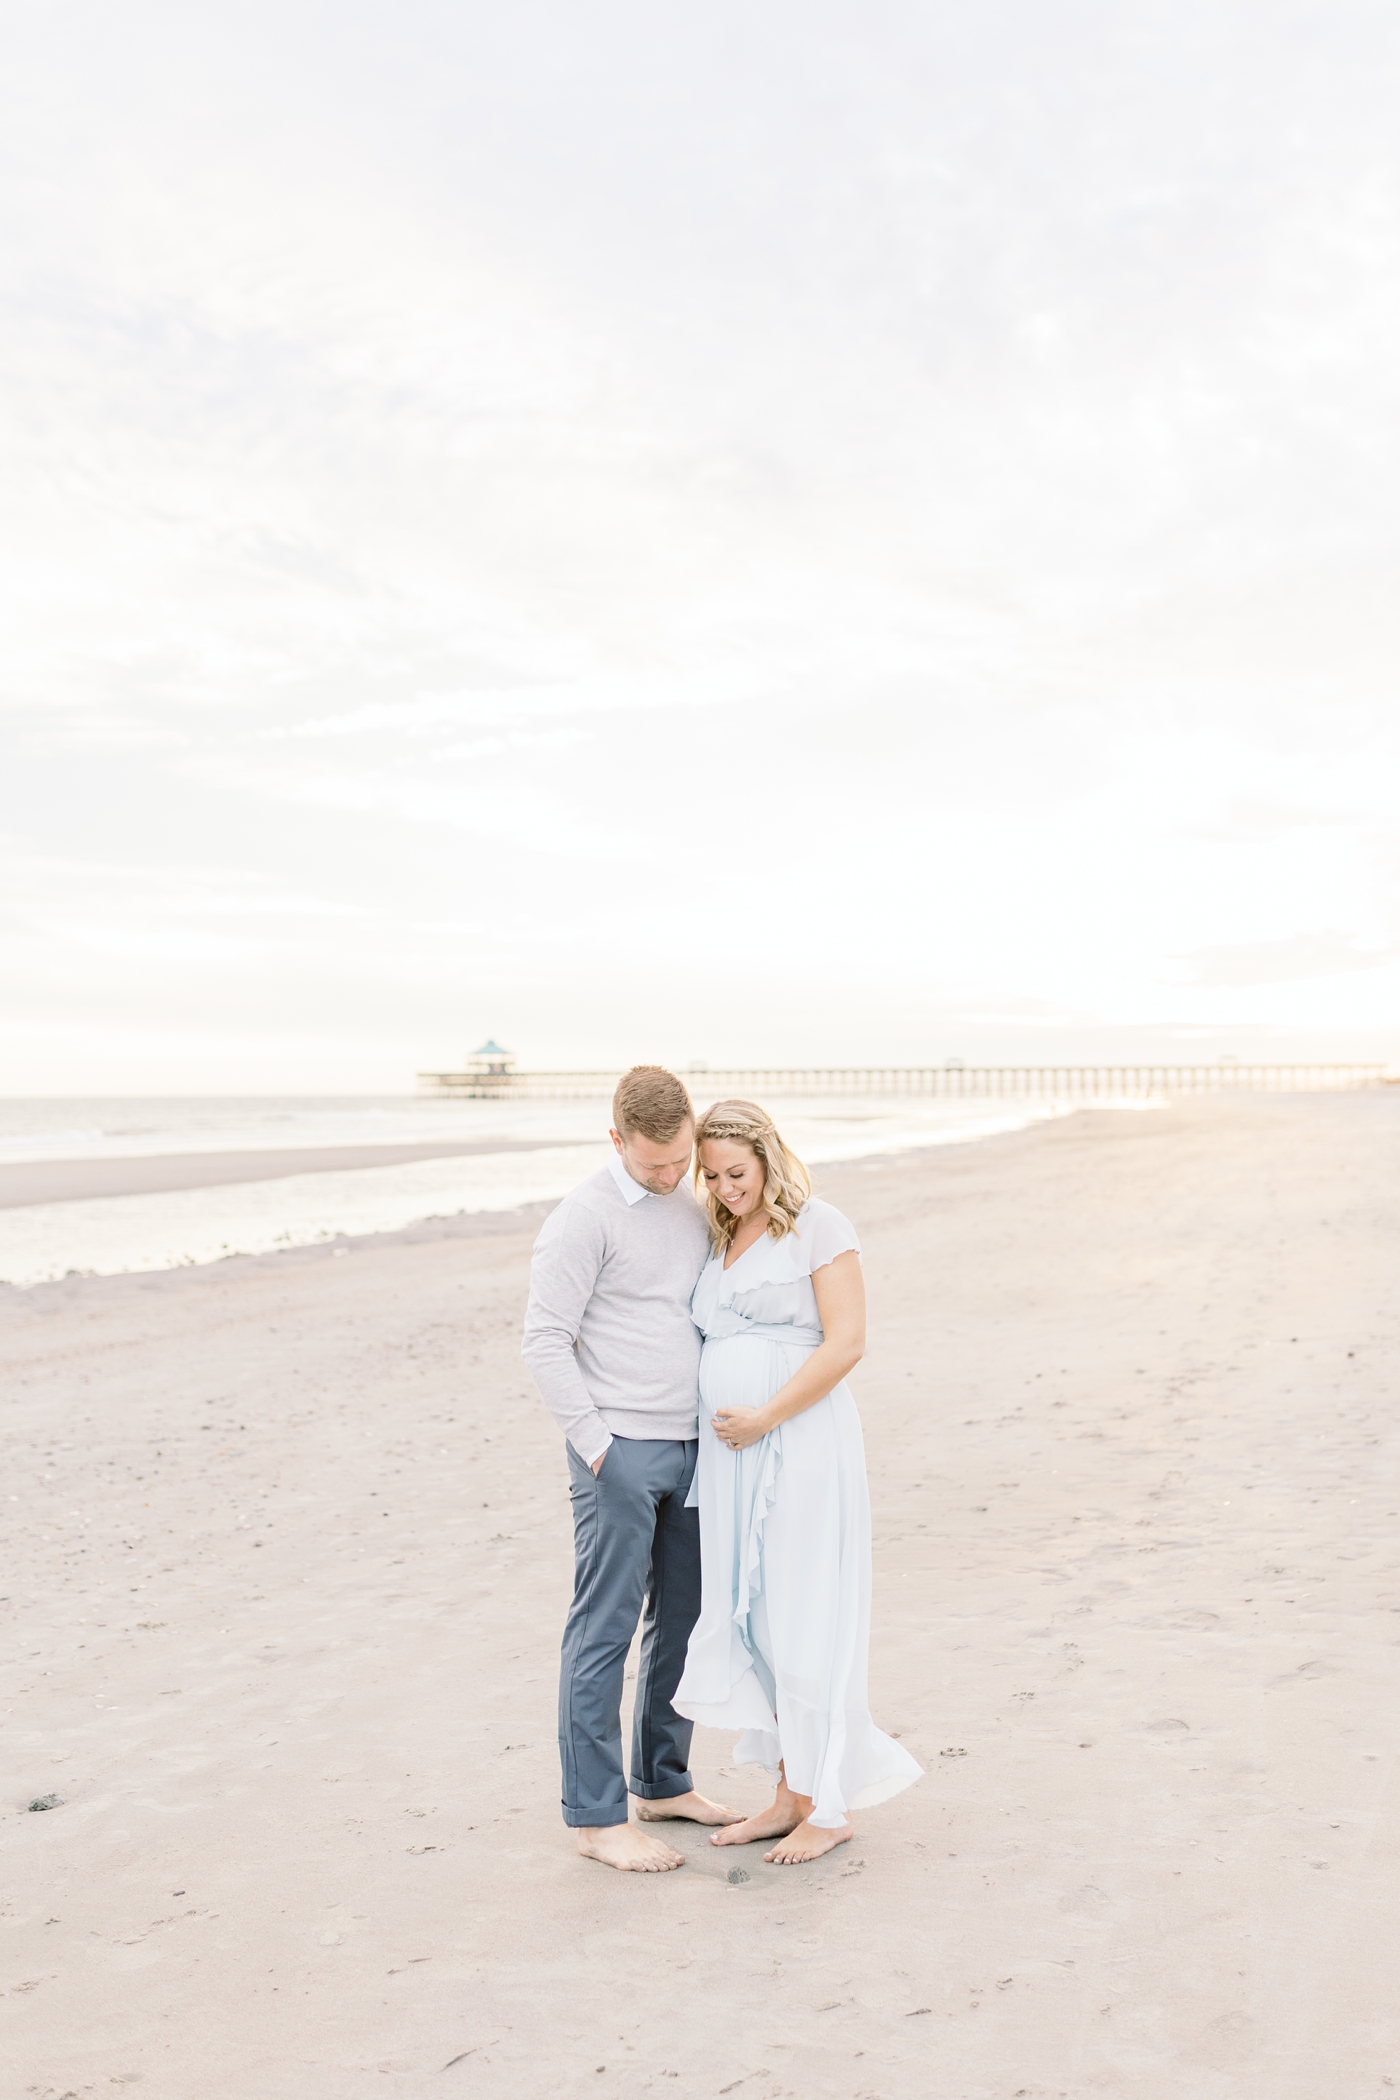 Maternity photoshoot with Folly Beach Pier in the background. Photo by Caitlyn Motycka Photography.